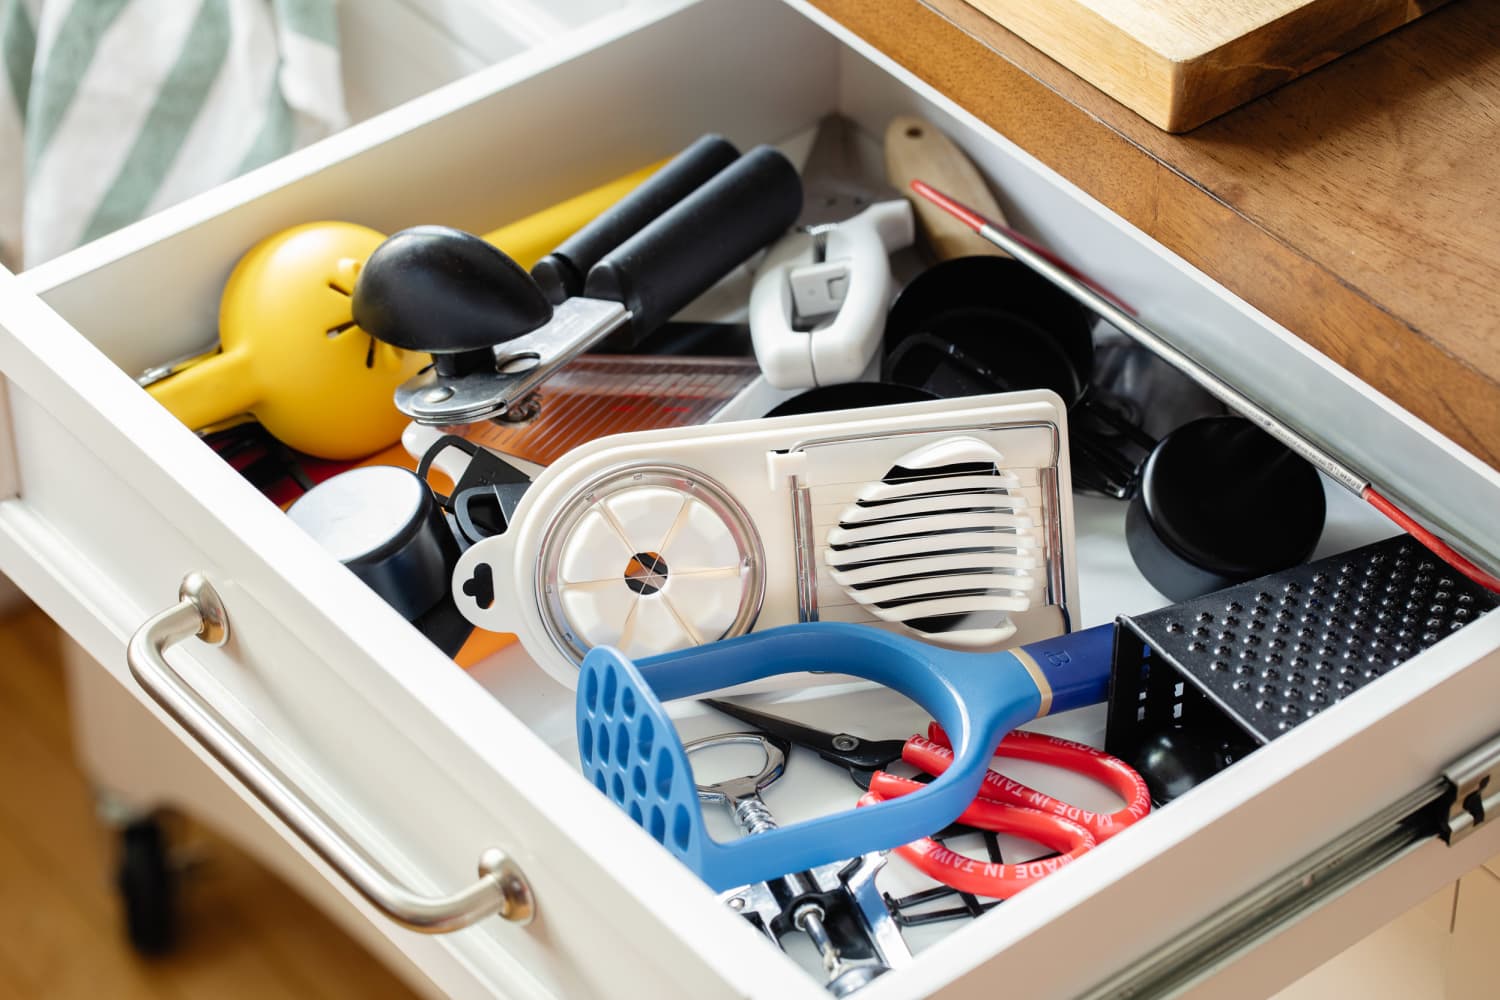 https://cdn.apartmenttherapy.info/image/upload/f_auto,q_auto:eco,c_fill,g_auto,w_1500,ar_3:2/k%2FPhoto%2FLifestyle%2F2021-08-The-Most-Brilliant-Drawer-Organizing-Tip-That-Everyone-Needs-to-Hear%2FKitchn-2021-Drawer-Organizing-Tip-1